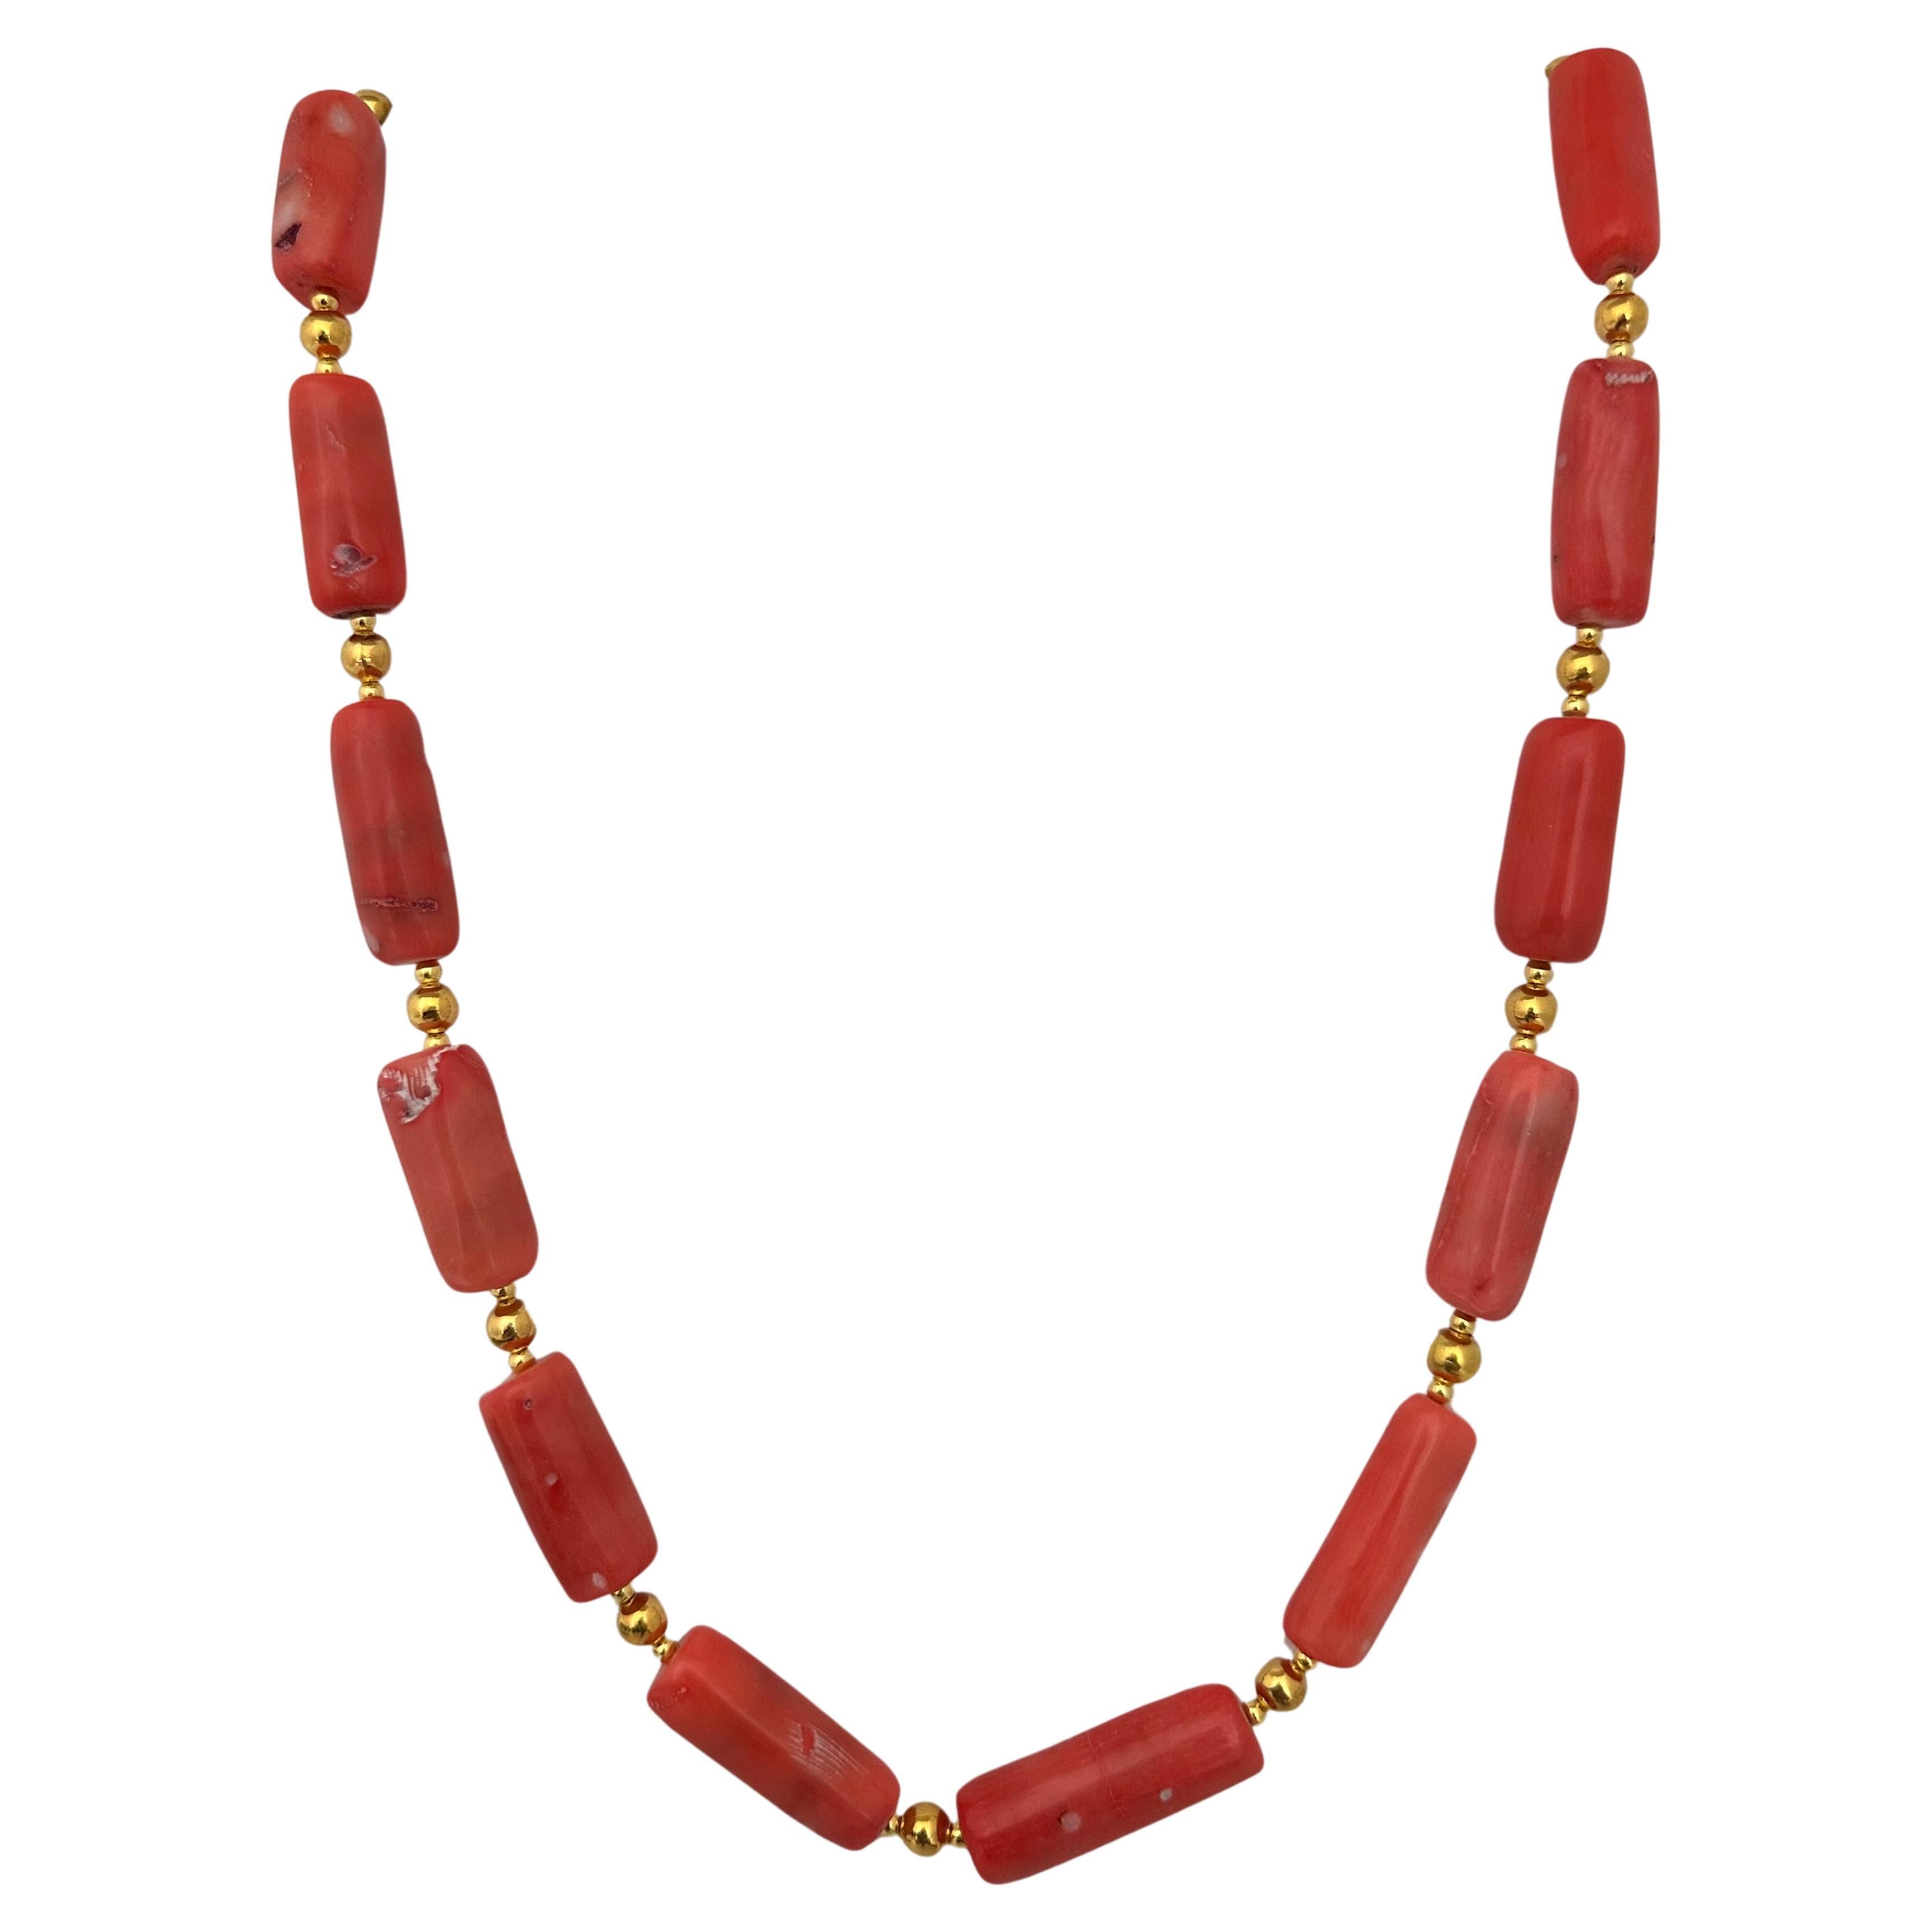 Handmade Gold Plated Beads & Salmon Barrel Shape Coral Beaded 24" Necklace #C39 For Sale